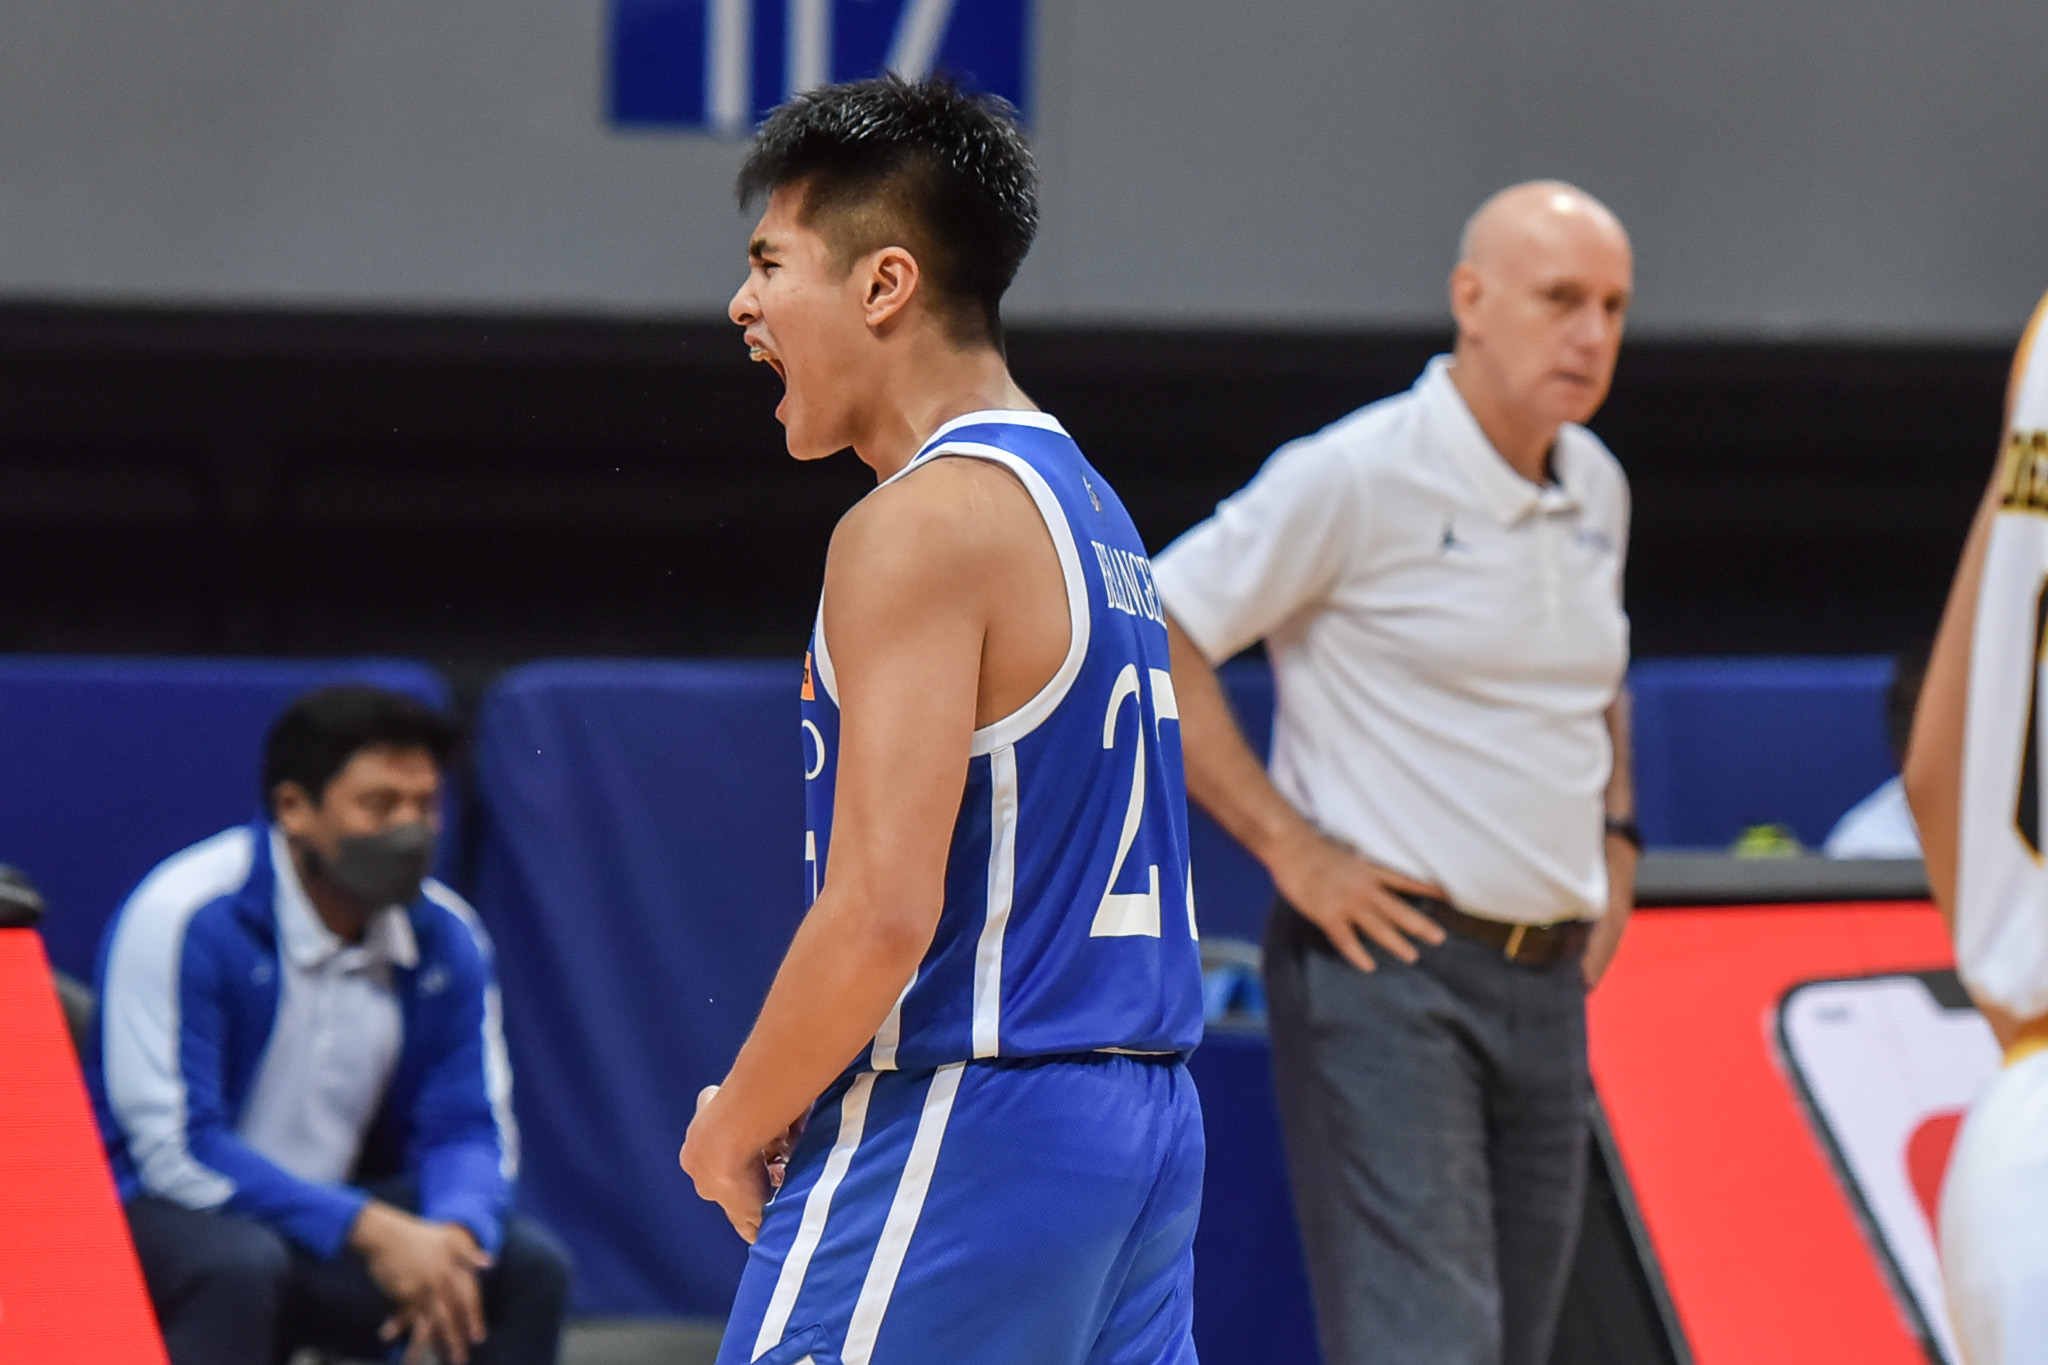 UAAP-84-MBB-ADMU-vs.-UST-SJ-Belangel-2171 Baldwin hopes UST drubbing is a 'sign of things to come' for Ateneo ADMU Basketball News UAAP  - philippine sports news